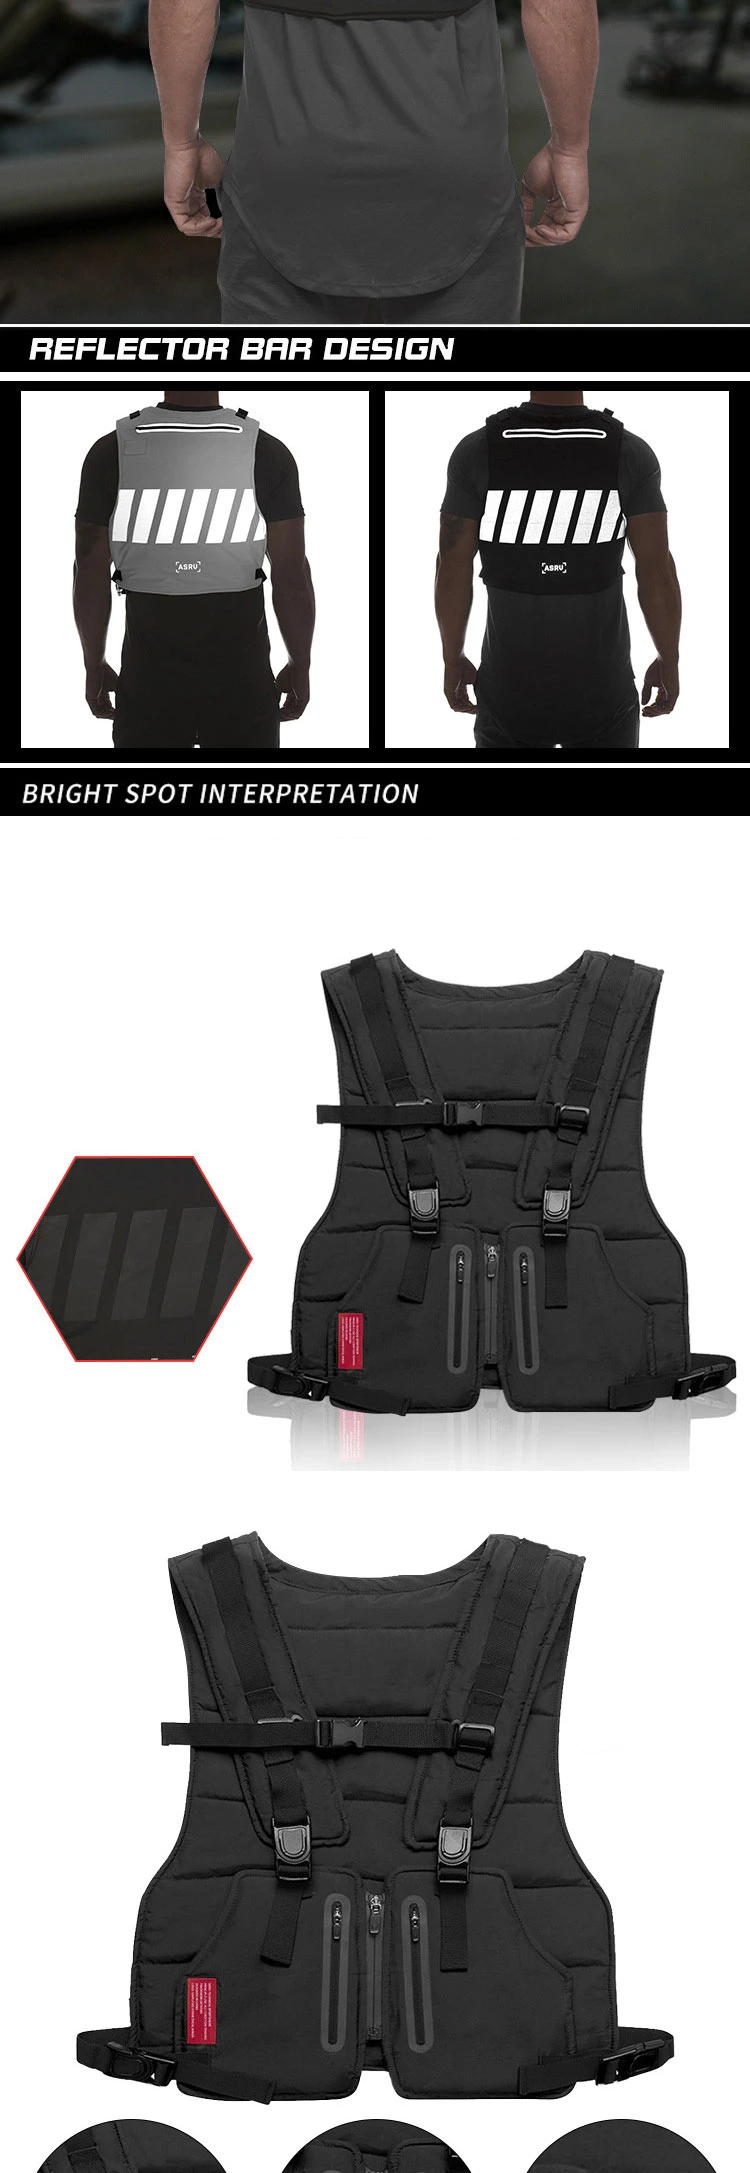 2009 New Multifunctional Tactical Vest Printed Outdoor Protective Vest Reflective Training Training Uniform